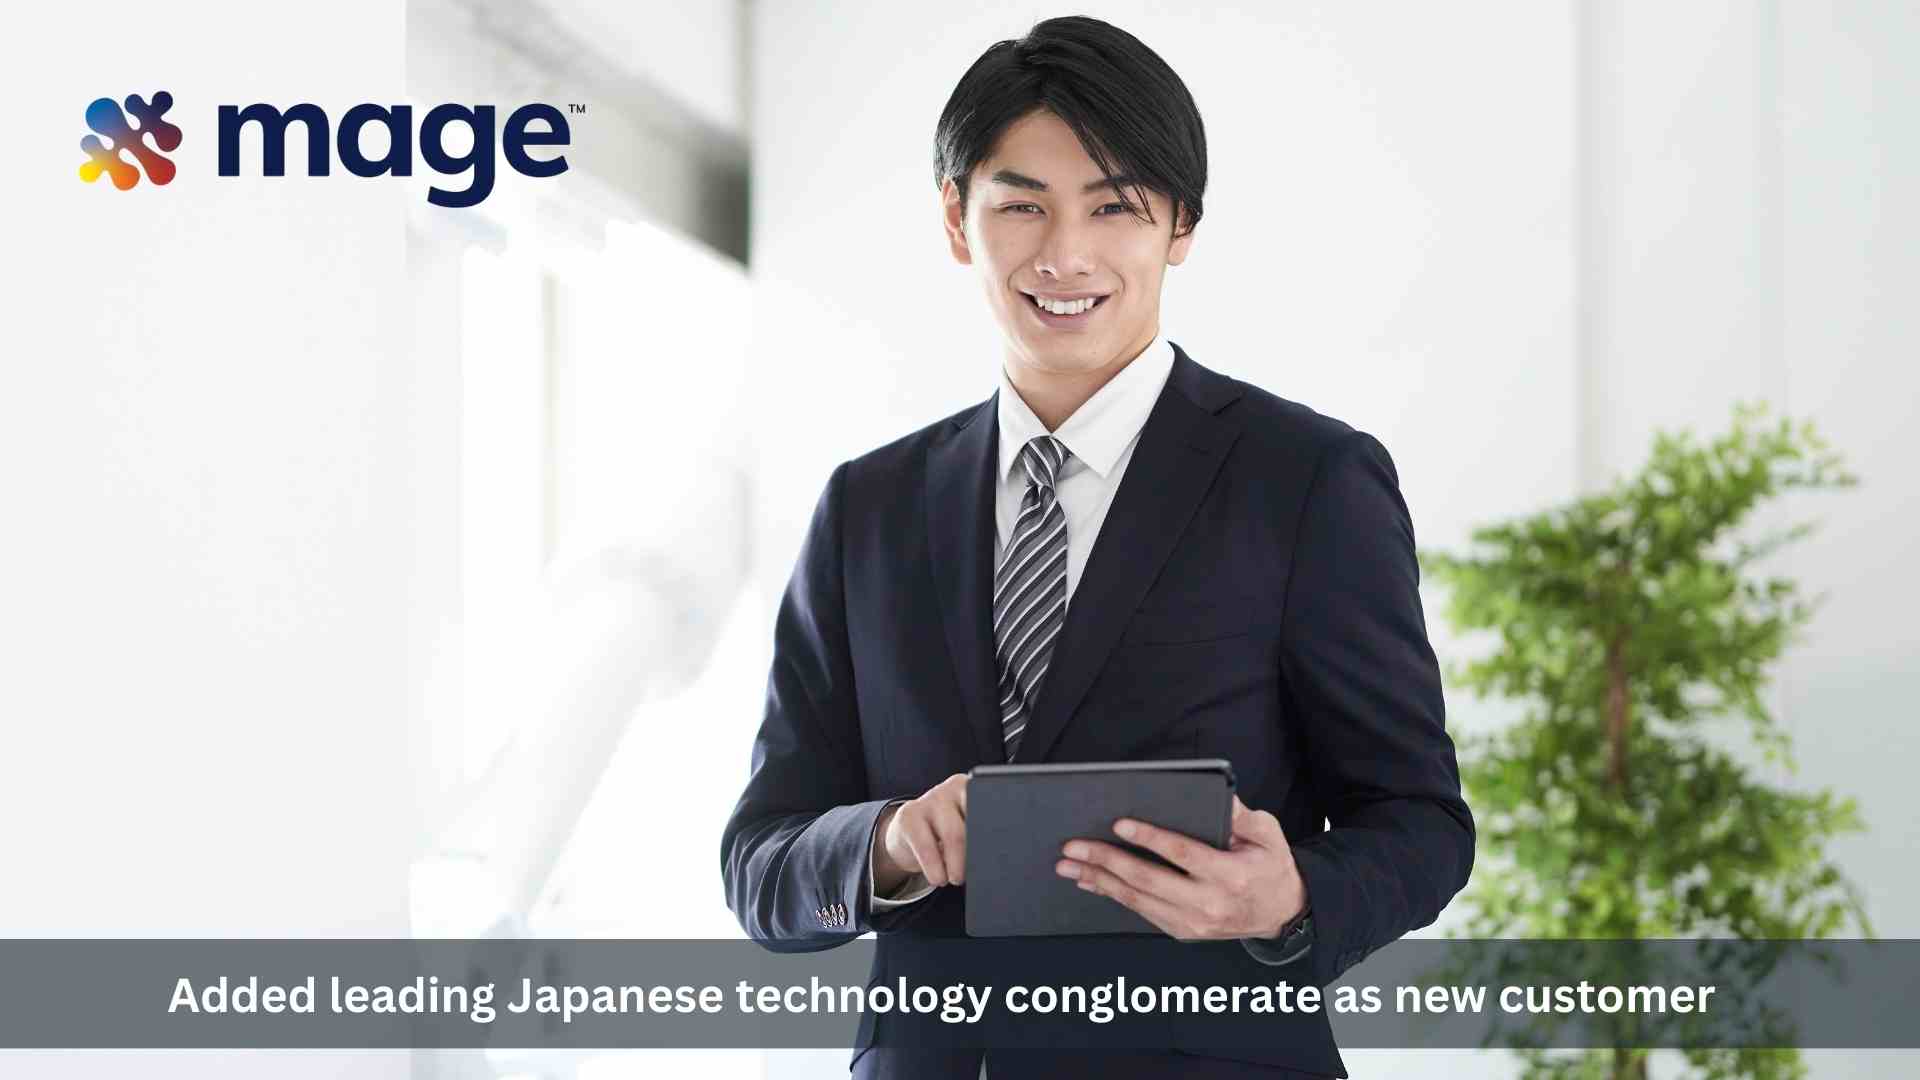 A Japanese Technology Conglomerate chooses Mage Data for their Test Data Management needs